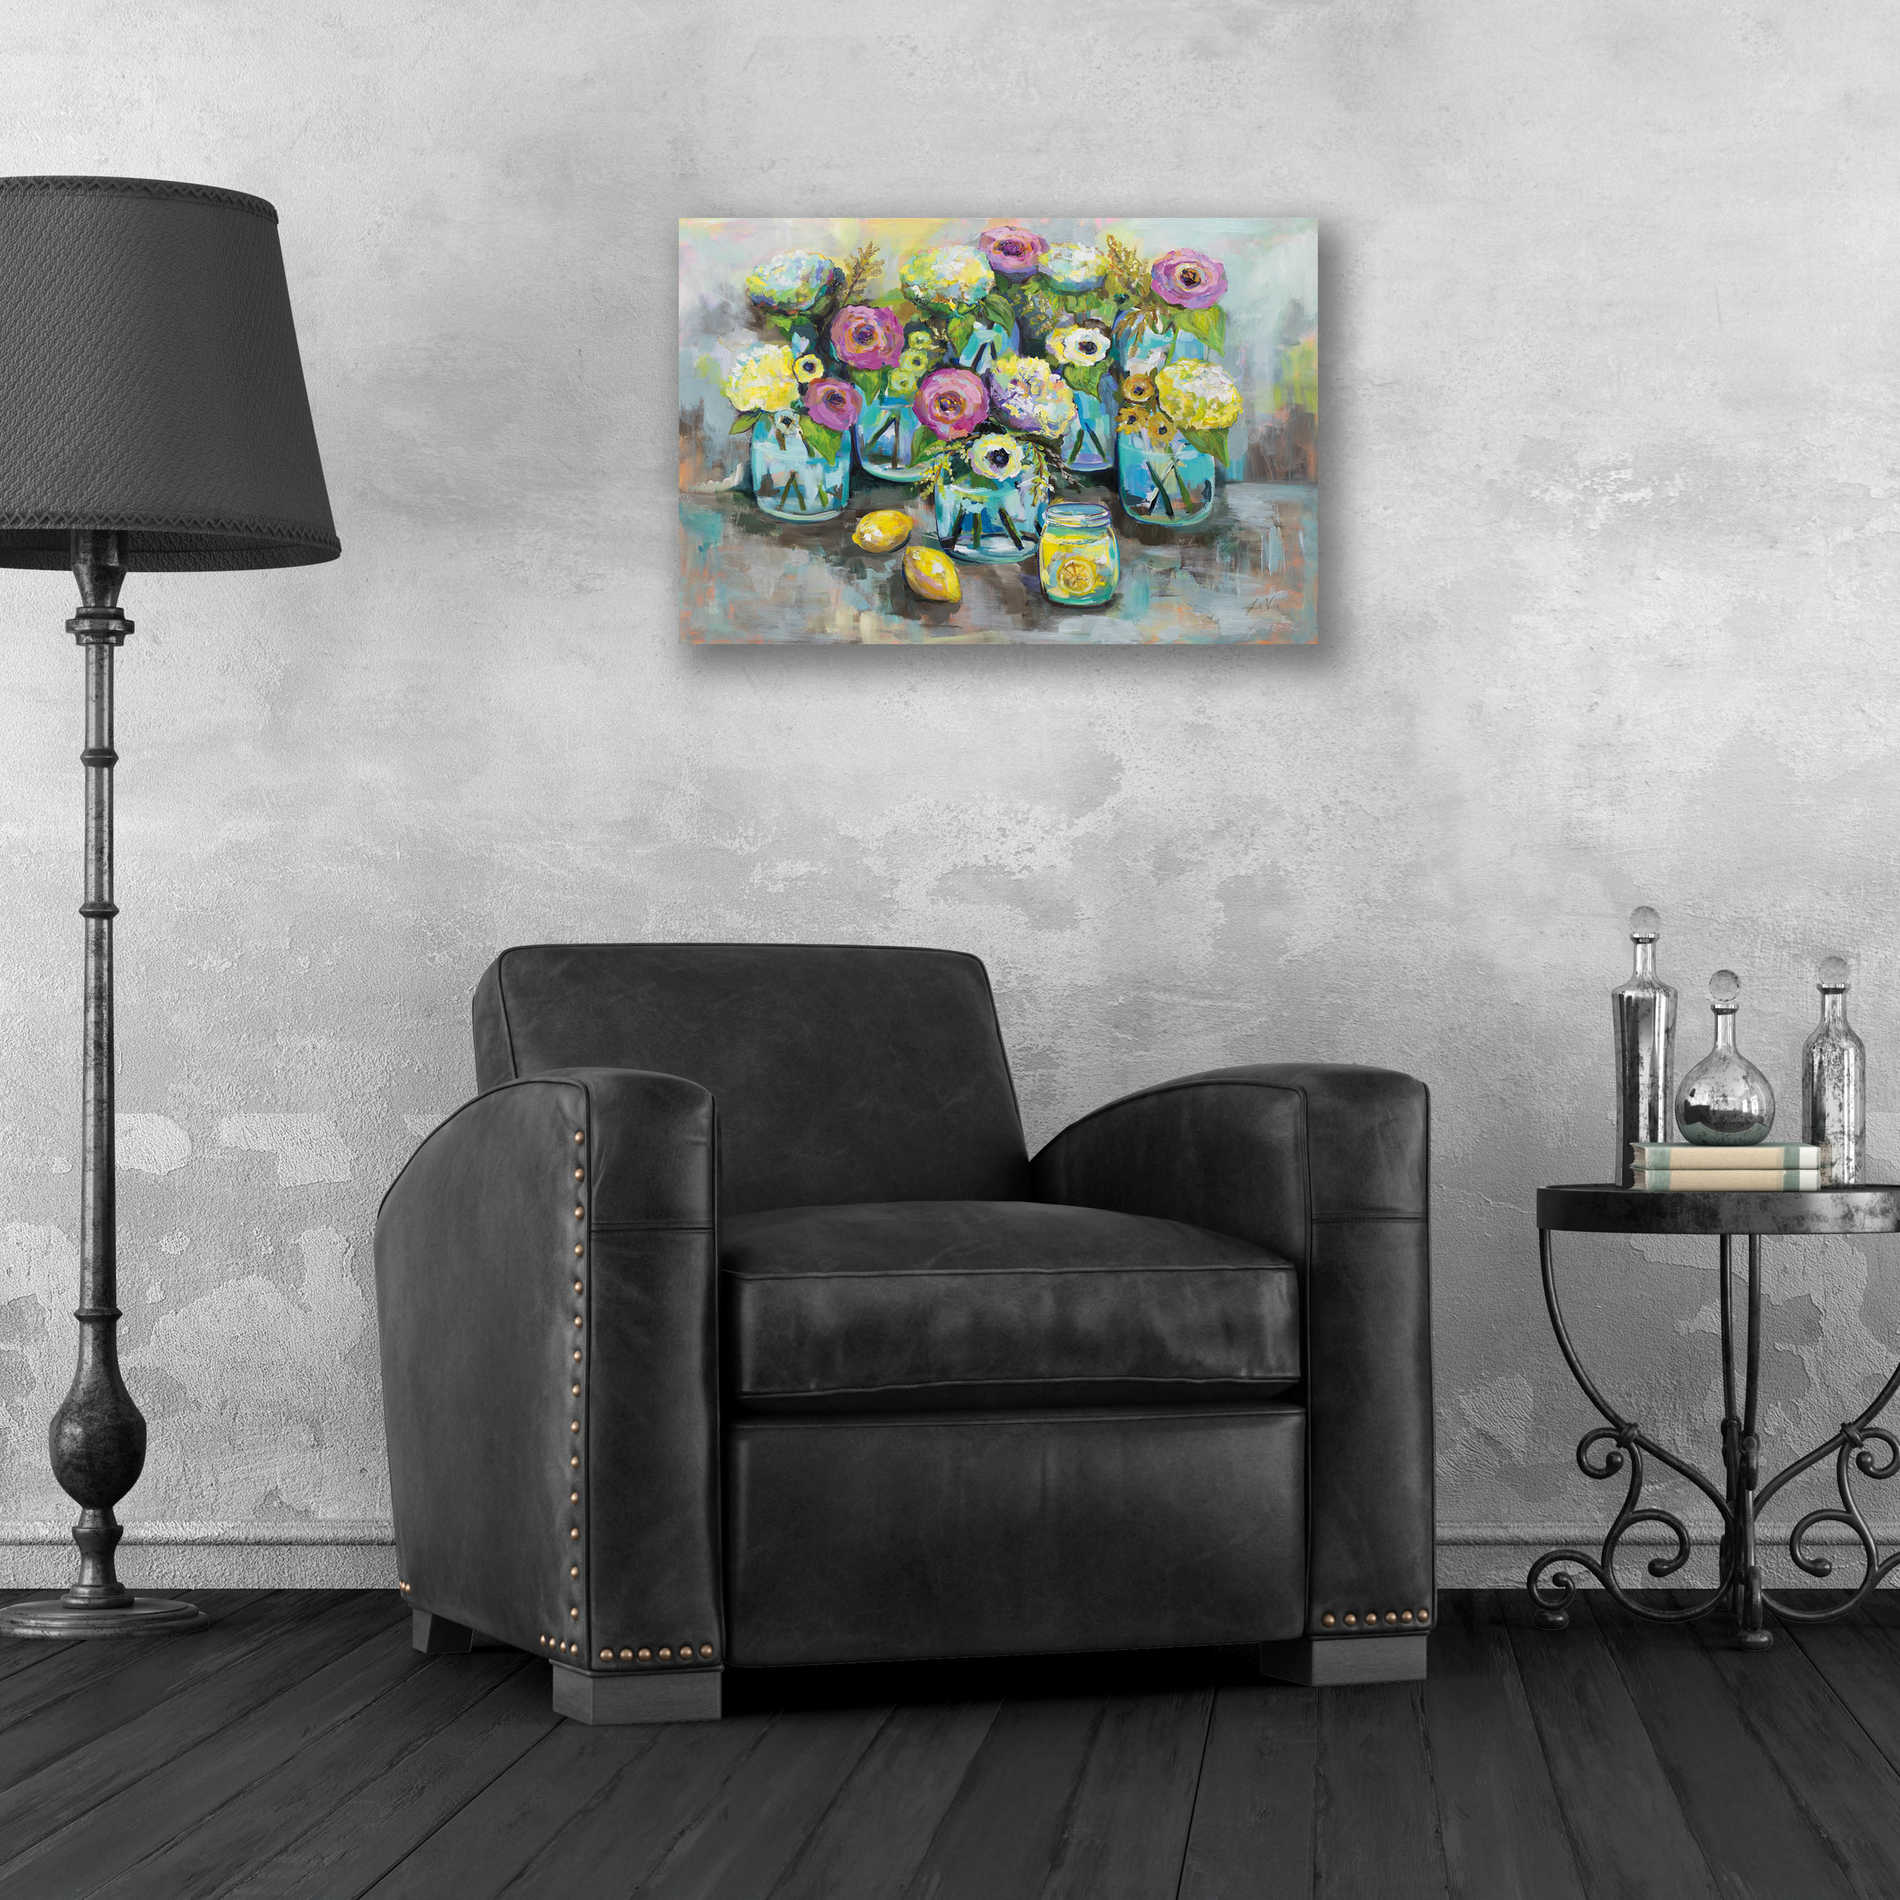 Epic Art 'When Life Gives You Lemons' by Jeanette Vertentes, Acrylic Glass Wall Art,24x16